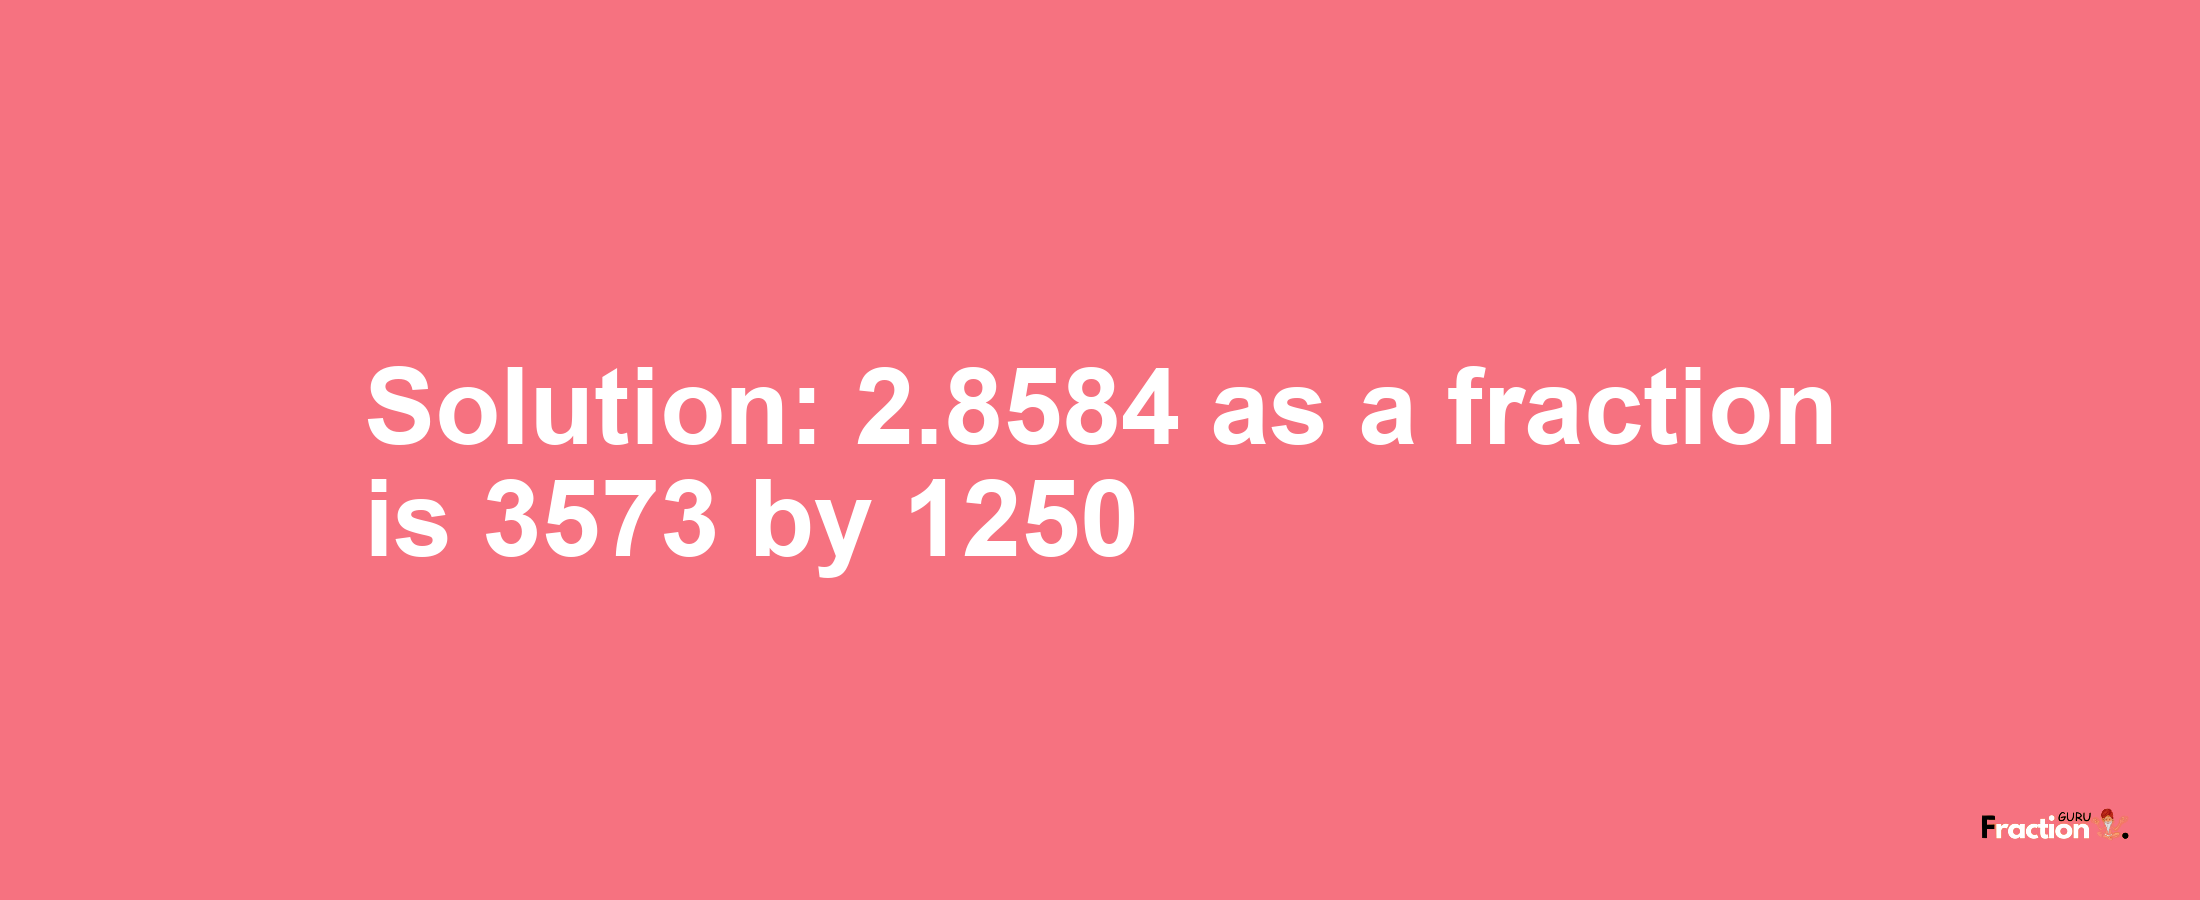 Solution:2.8584 as a fraction is 3573/1250